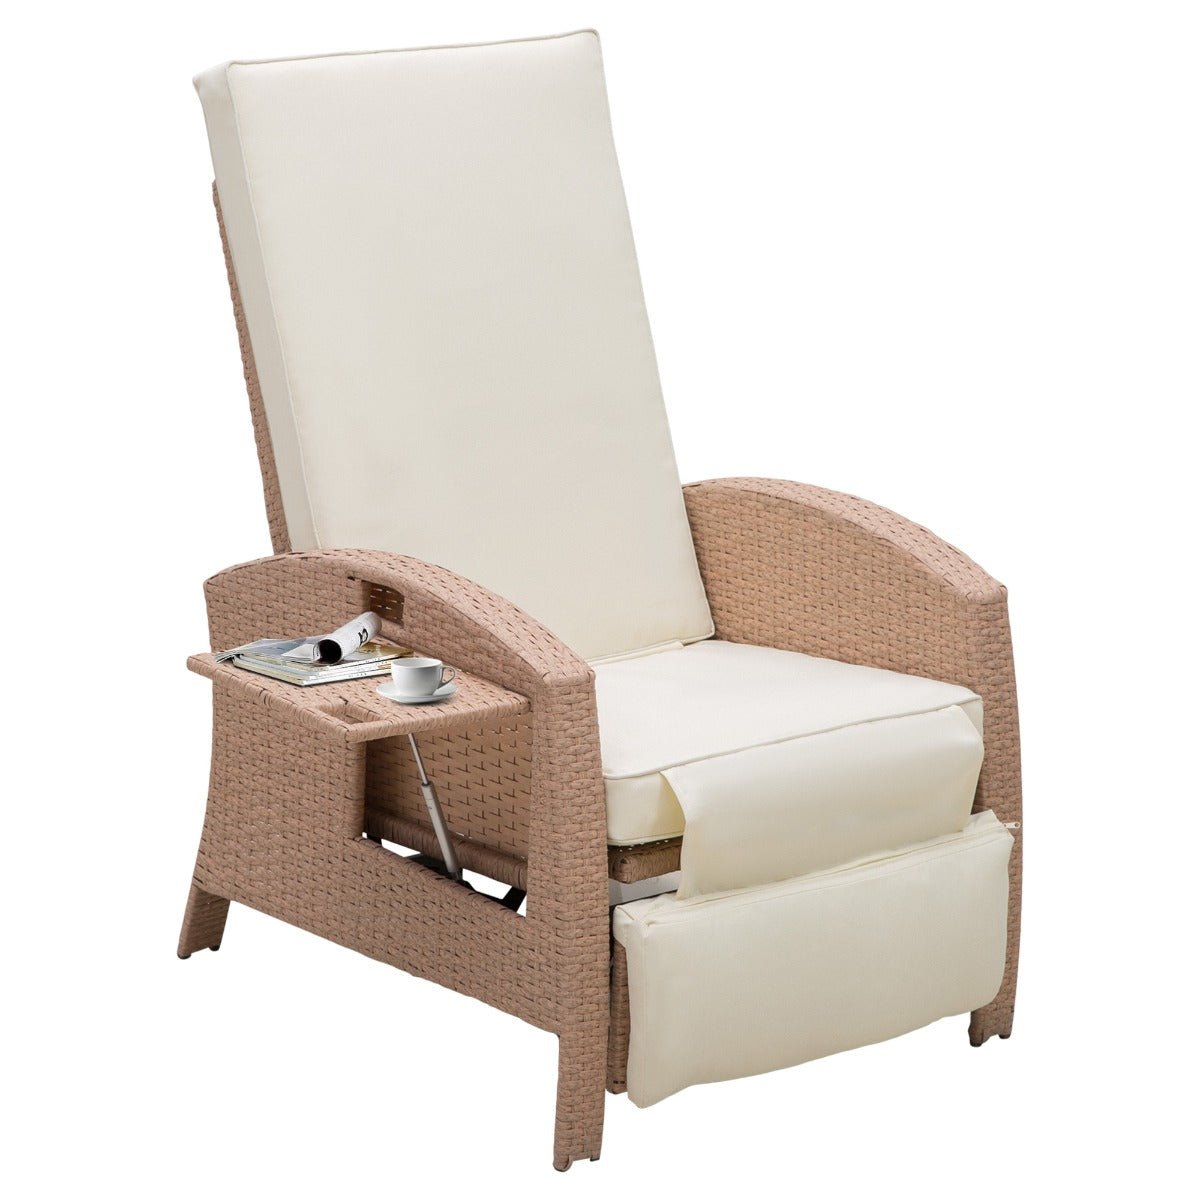 Outdoor and Garden-Outdoor Rattan Wicker Adjustable Recliner Lounge Chair with Drink Tray - Outdoor Style Company